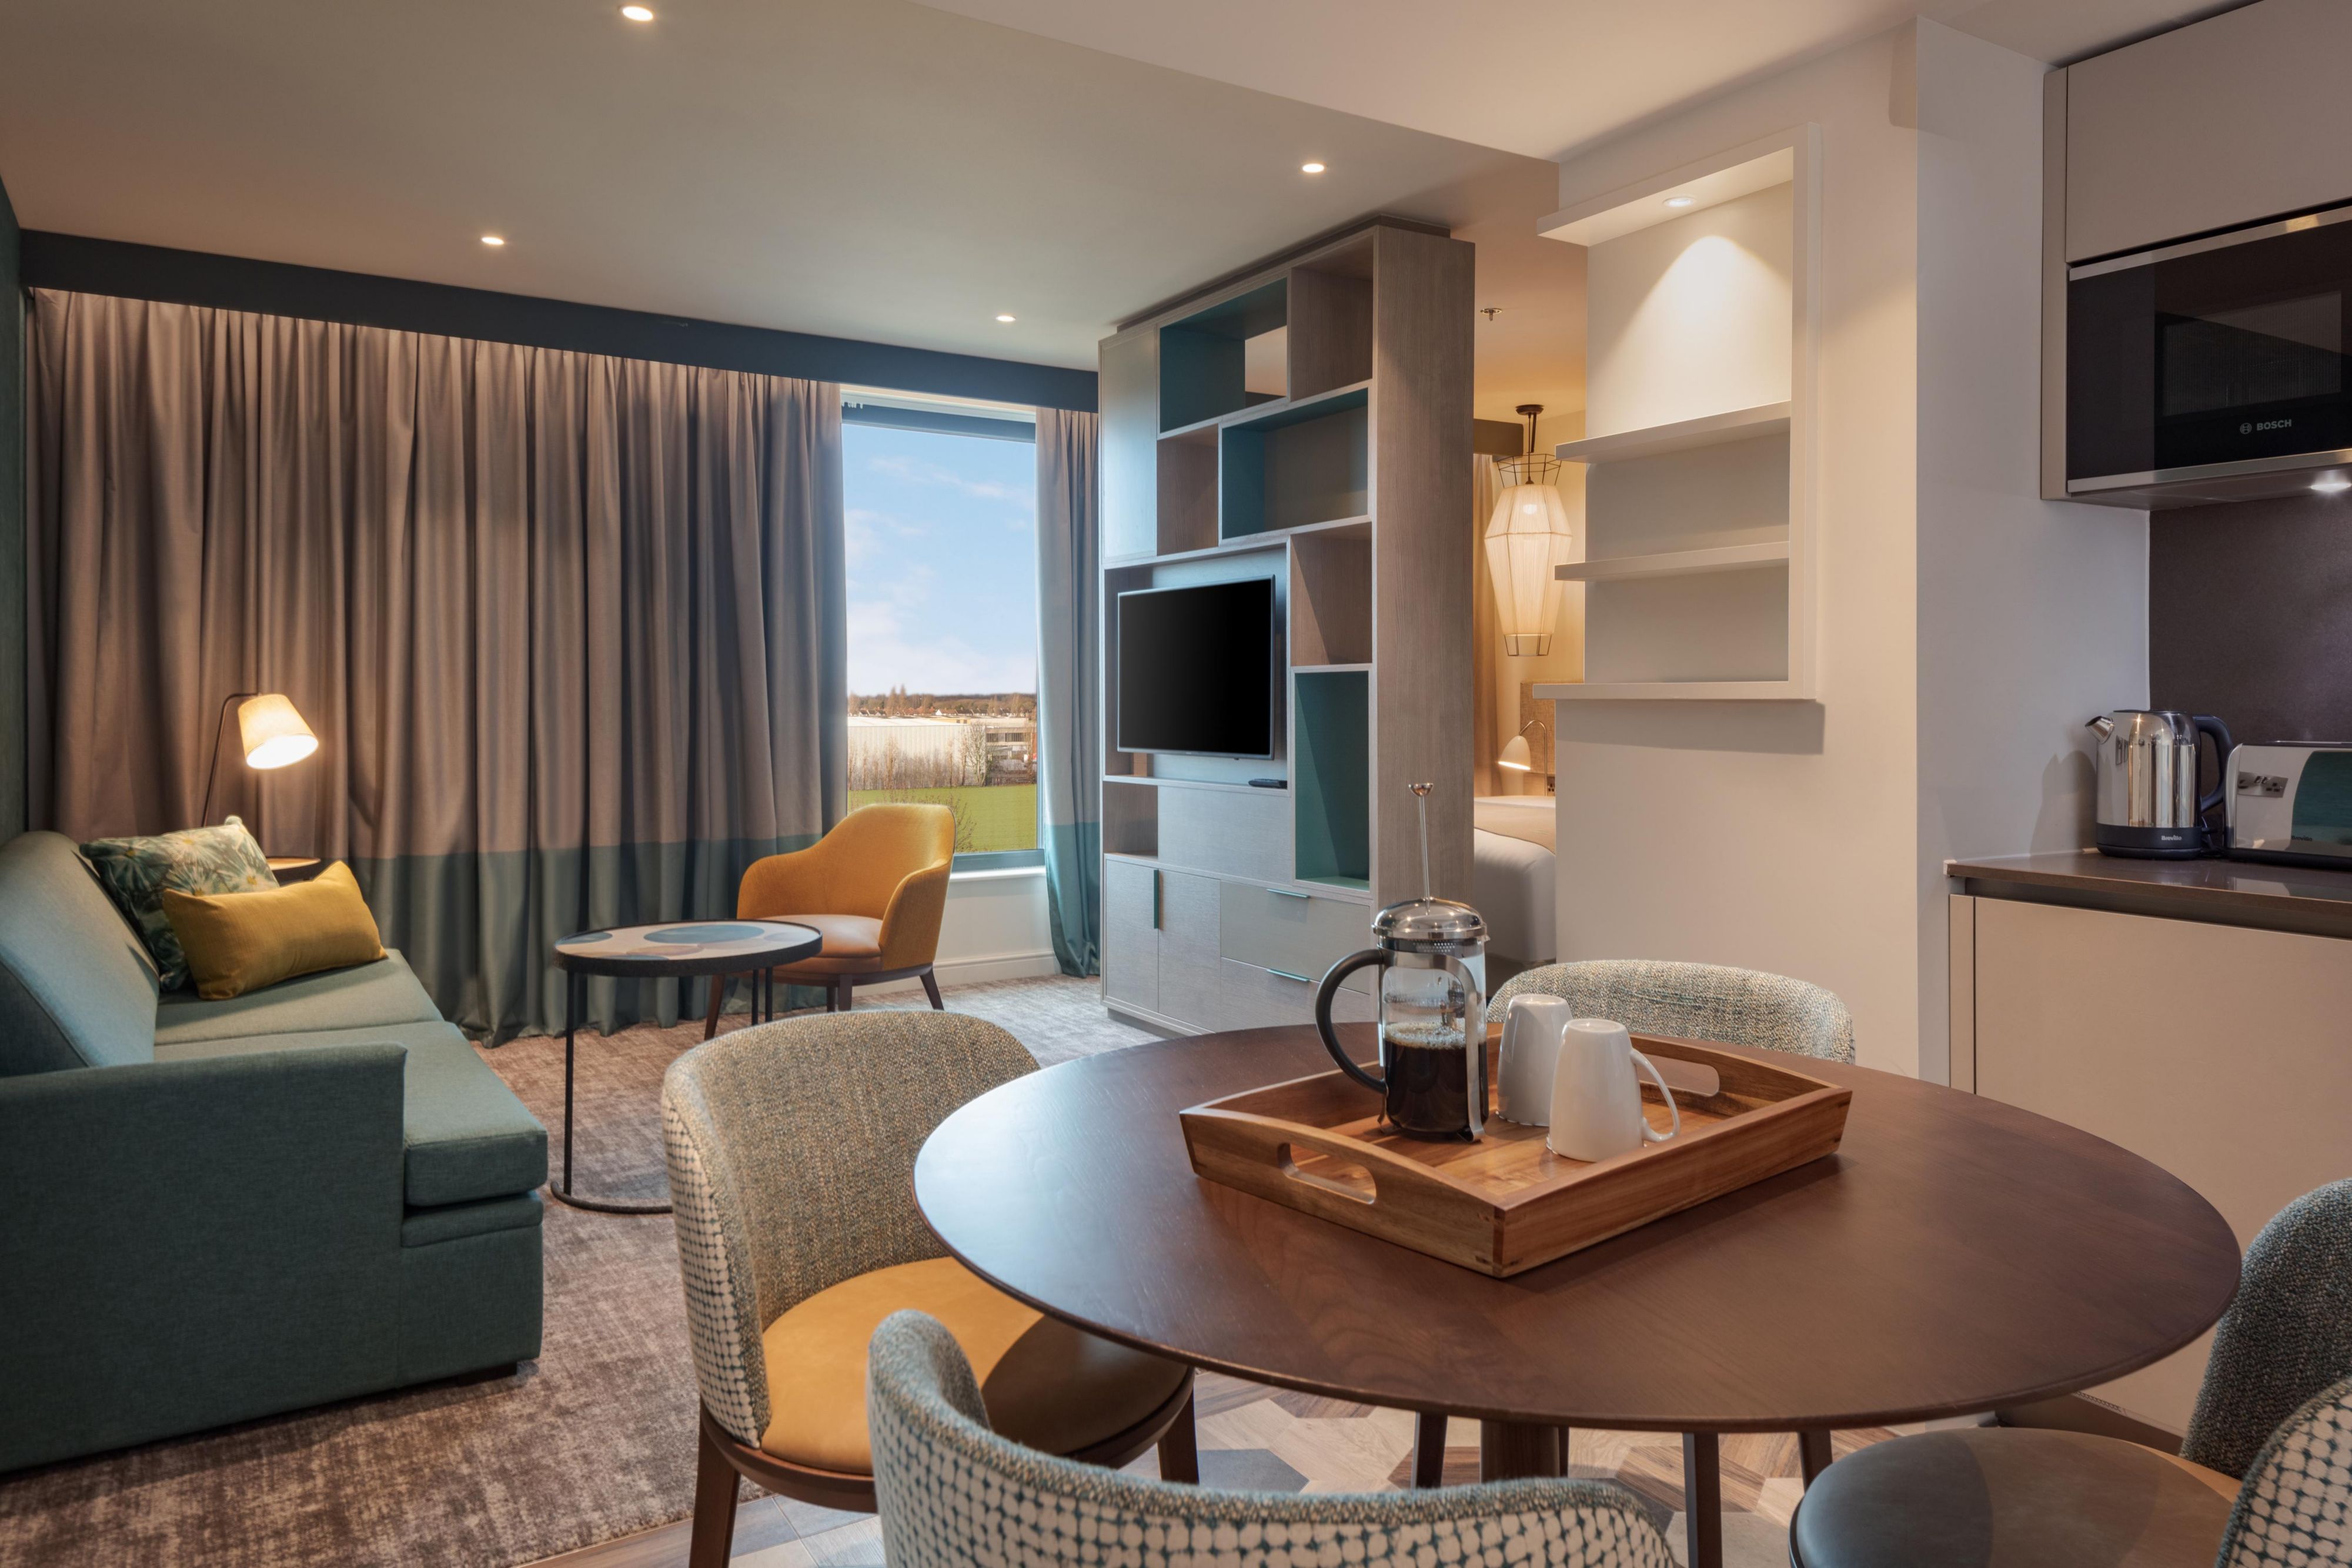 Our suites are ideal for those who need longer stays, and the longer you stay the less you pay! Contact our team to discuss any corporate project requirements or relocations and enjoy the comfort of a home from home at Staybridge Suites.